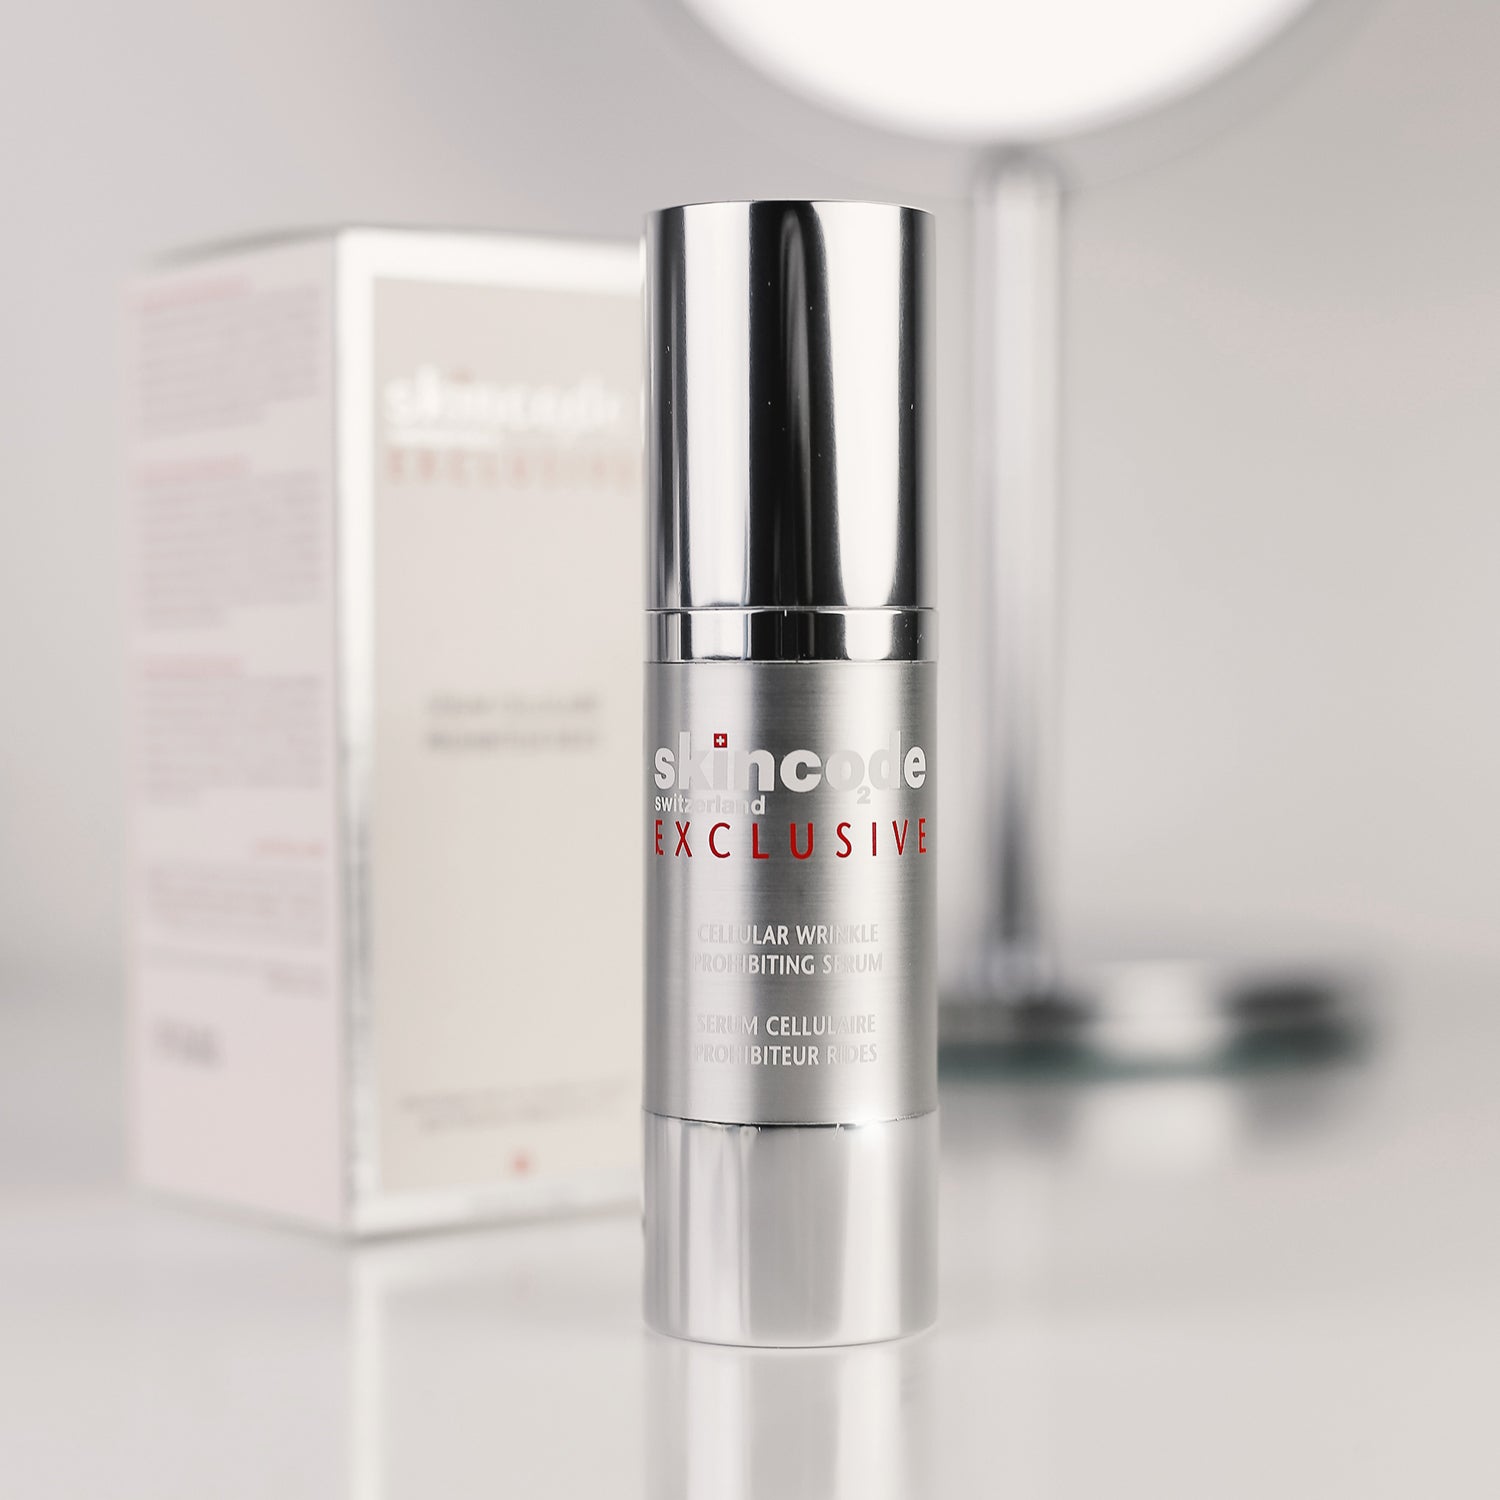 SkinCode Exclusive, Cellular Wrinkle Prohibiting Serum